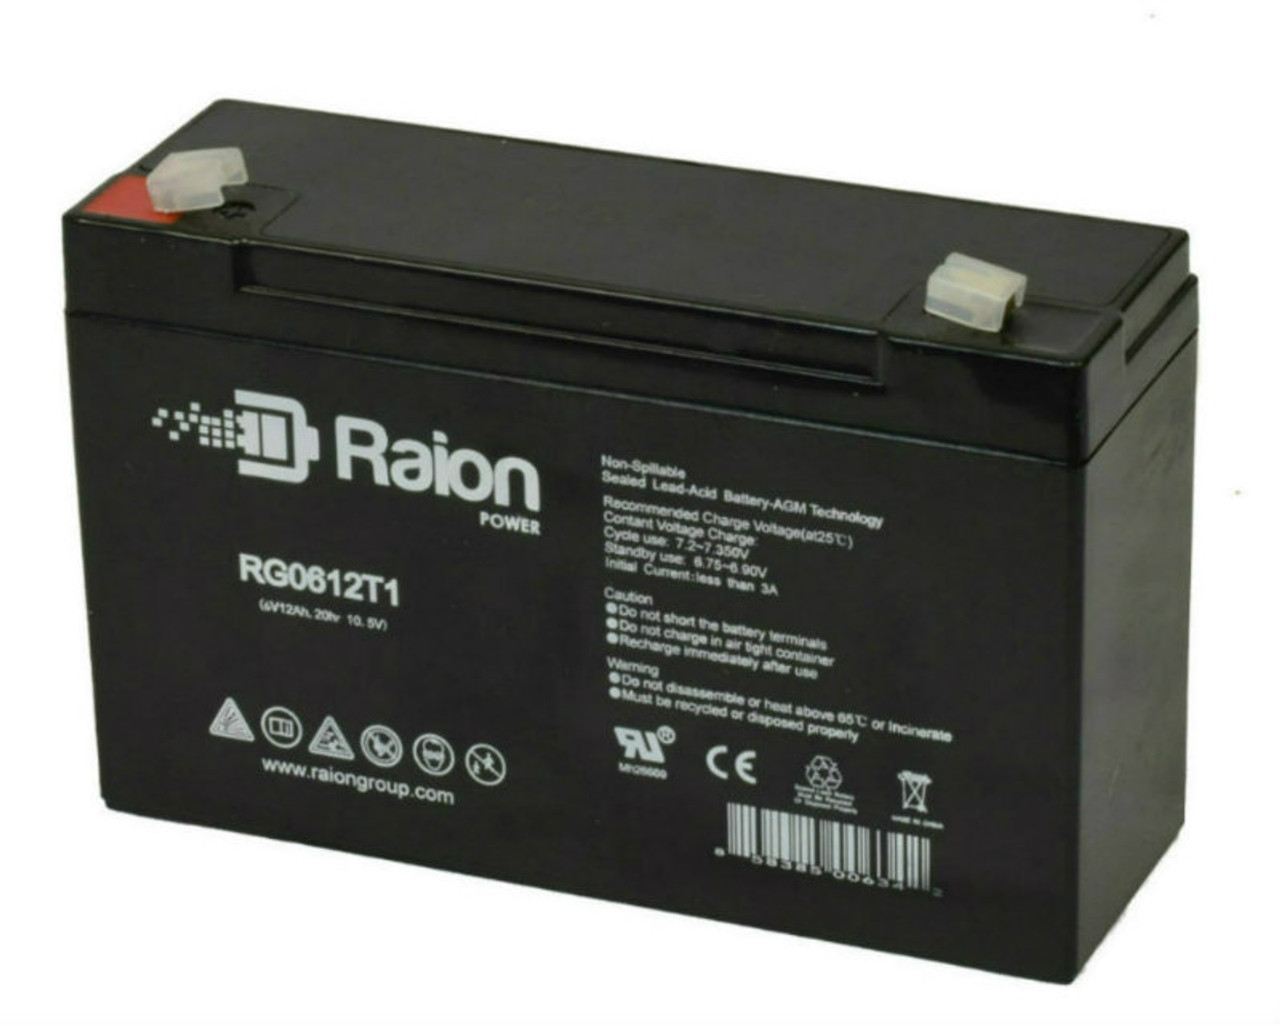 Raion Power RG06120T1 Replacement Emergency Light Battery for Sure-Lites SL2650